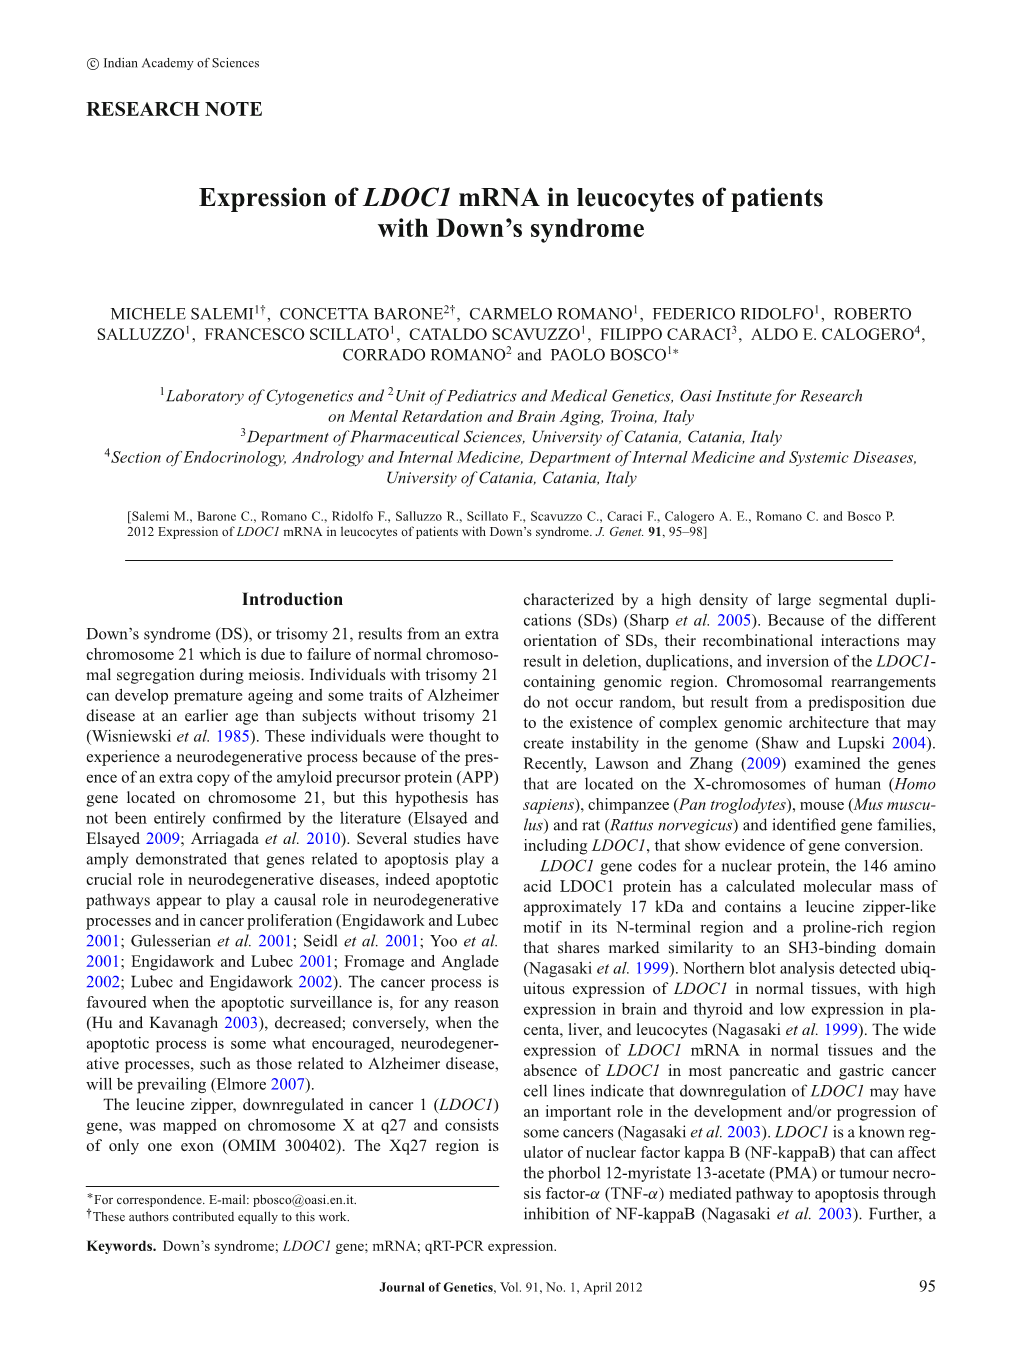 Expression of LDOC1 Mrna in Leucocytes of Patients with Down's